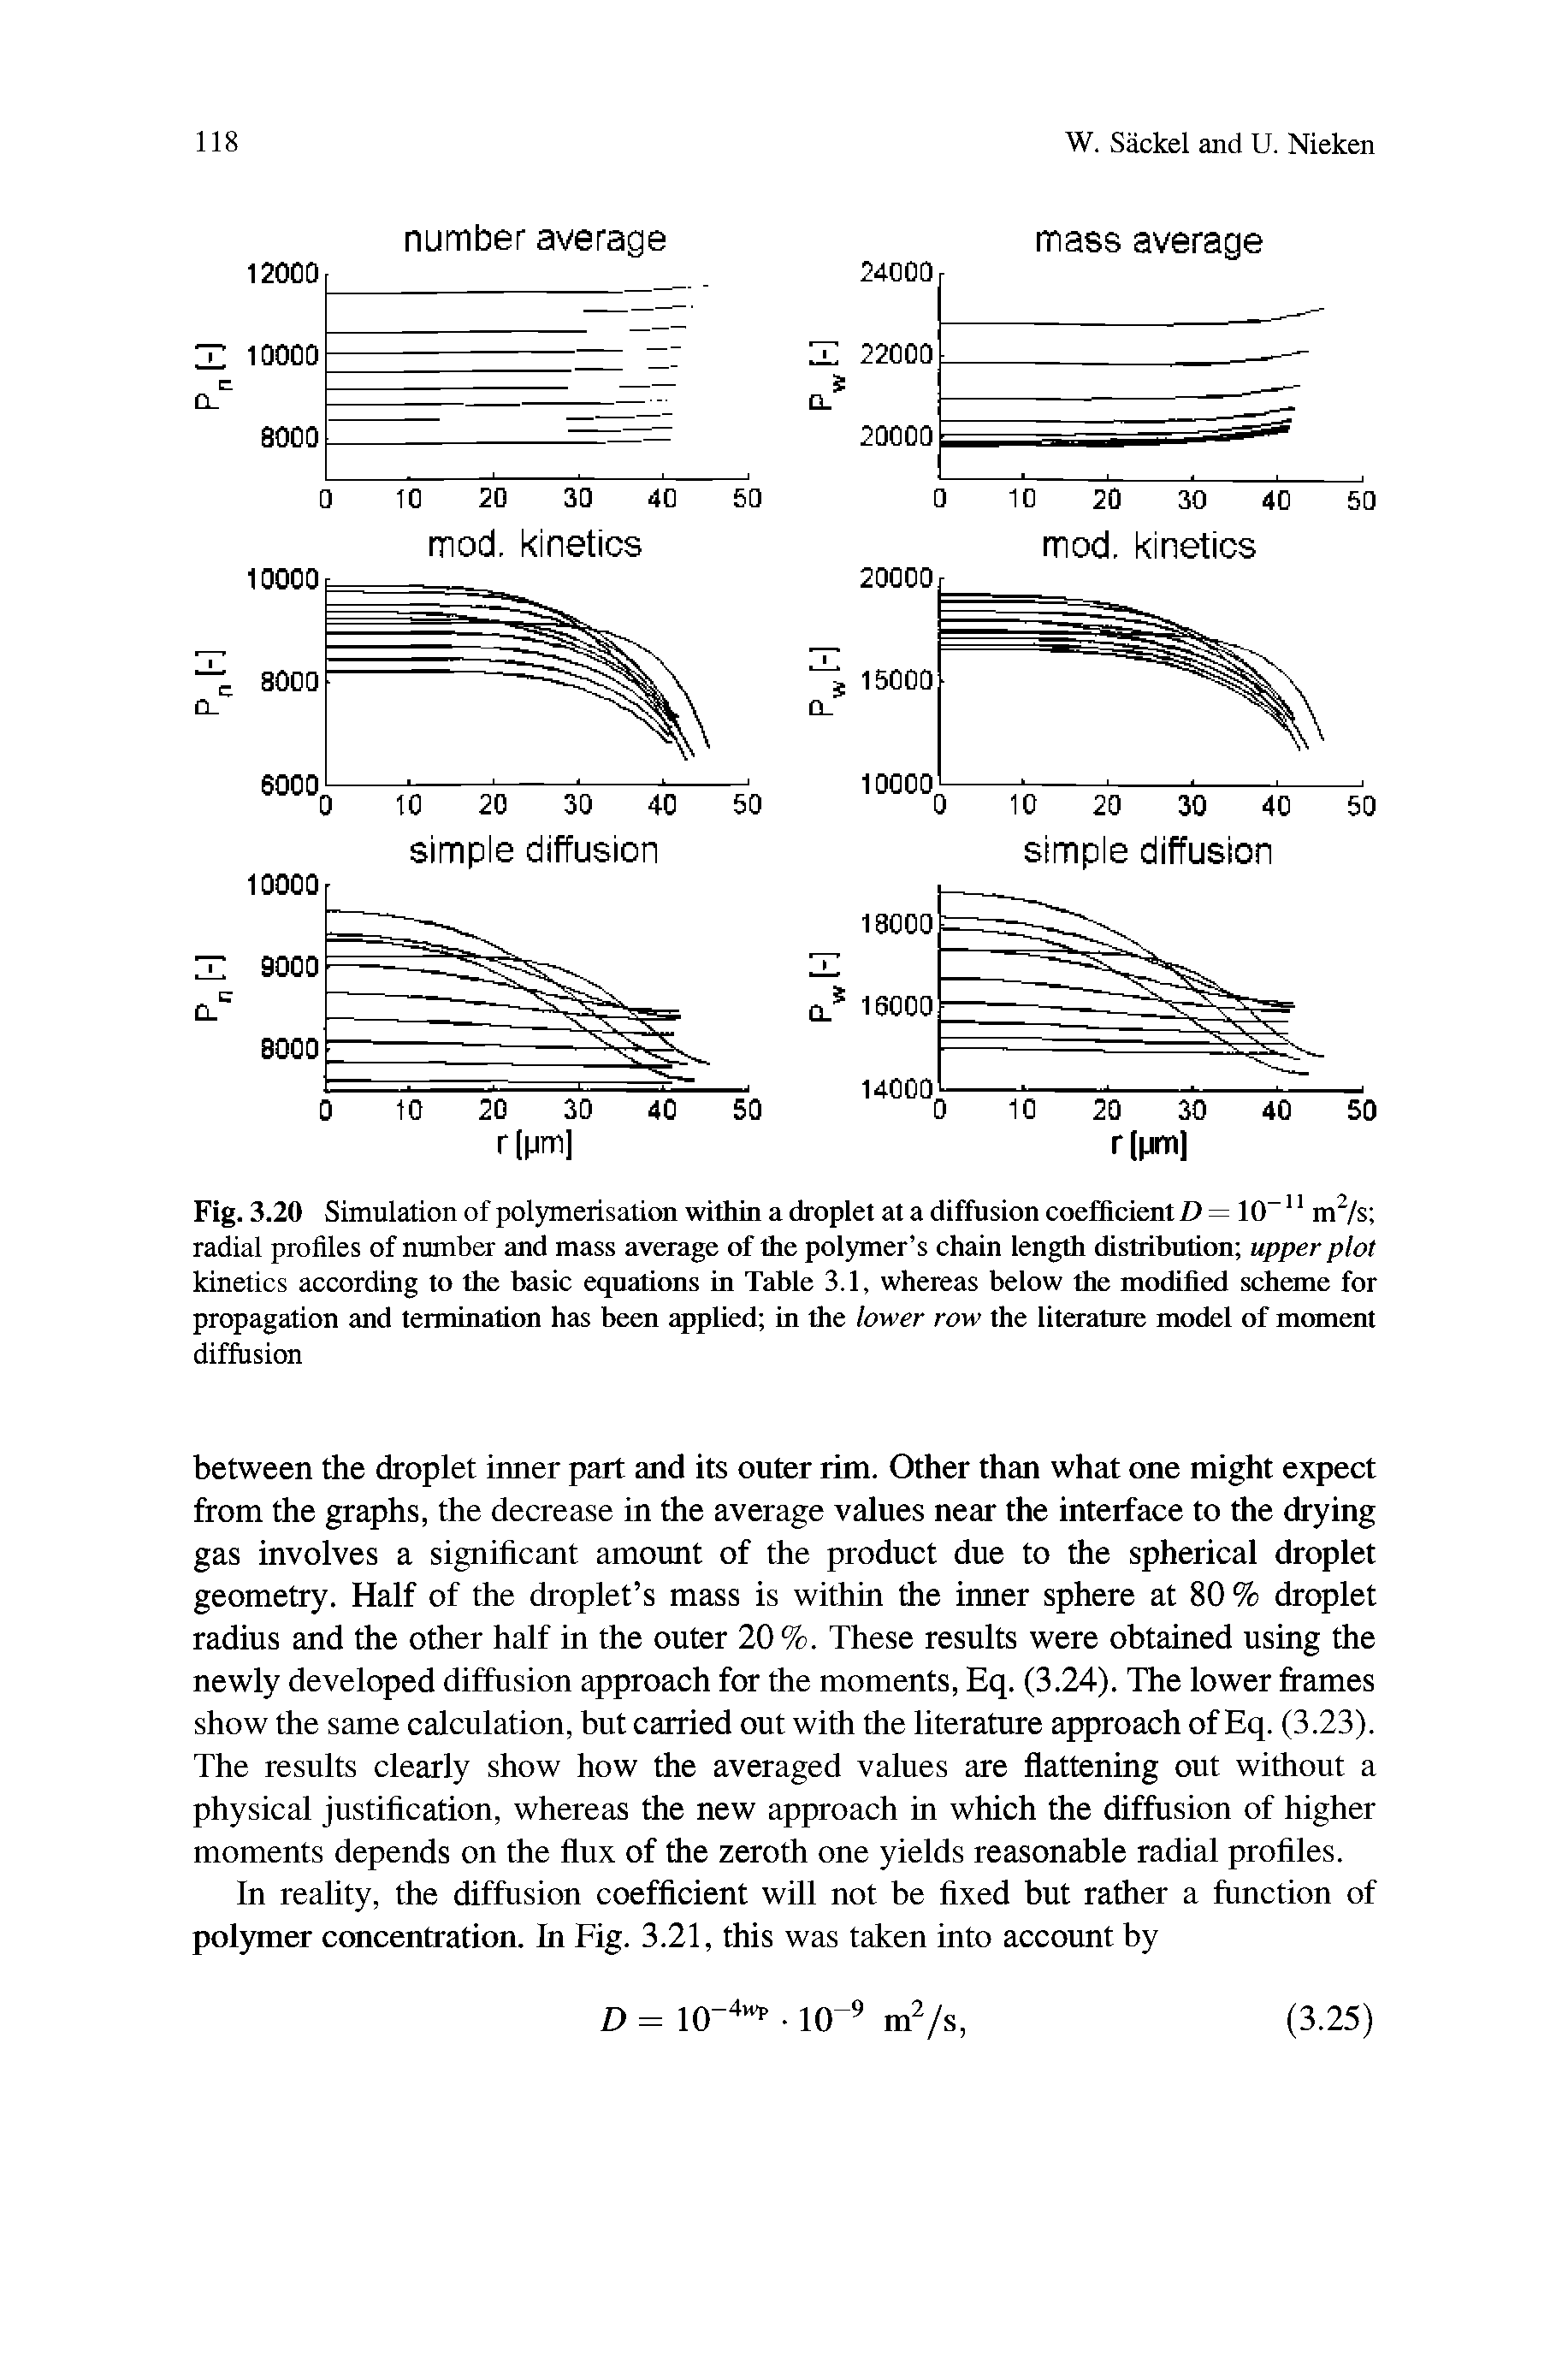 Fig. 3.20 Simulation of polymerisation within a dropiet at a diffusion coefficient Z = 10 " m /s radial profiles of number and mass average of the polymer s chain length distribution upper plot kinetics according to the basic equations in Table 3.1, whereas below the modified schcane for propagation and termination has been applied in the lower row the literature model of mrunent...